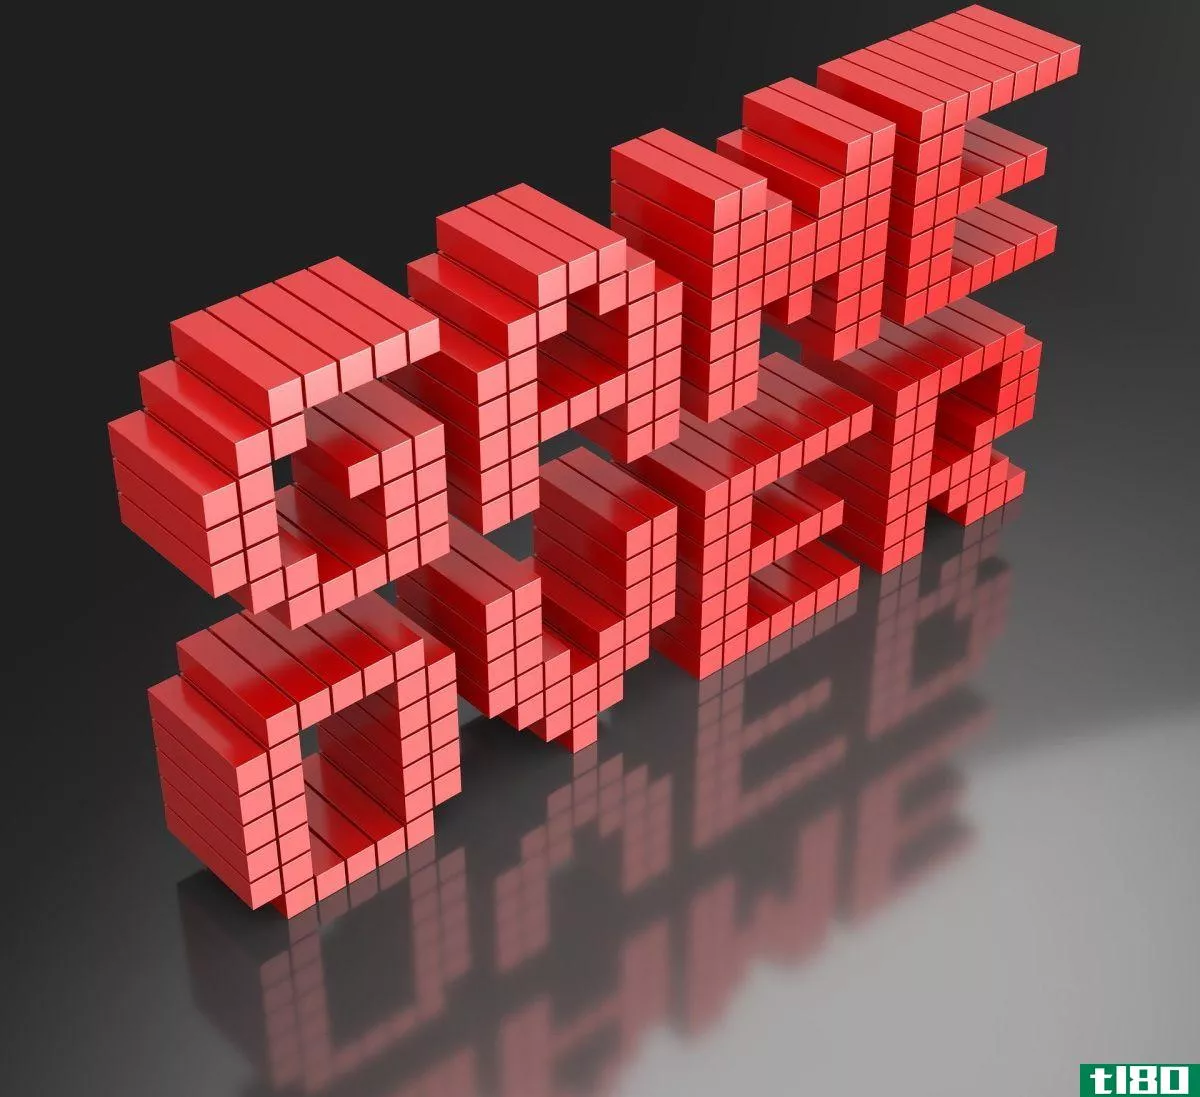 An image with the words "Game Over" displayed across it